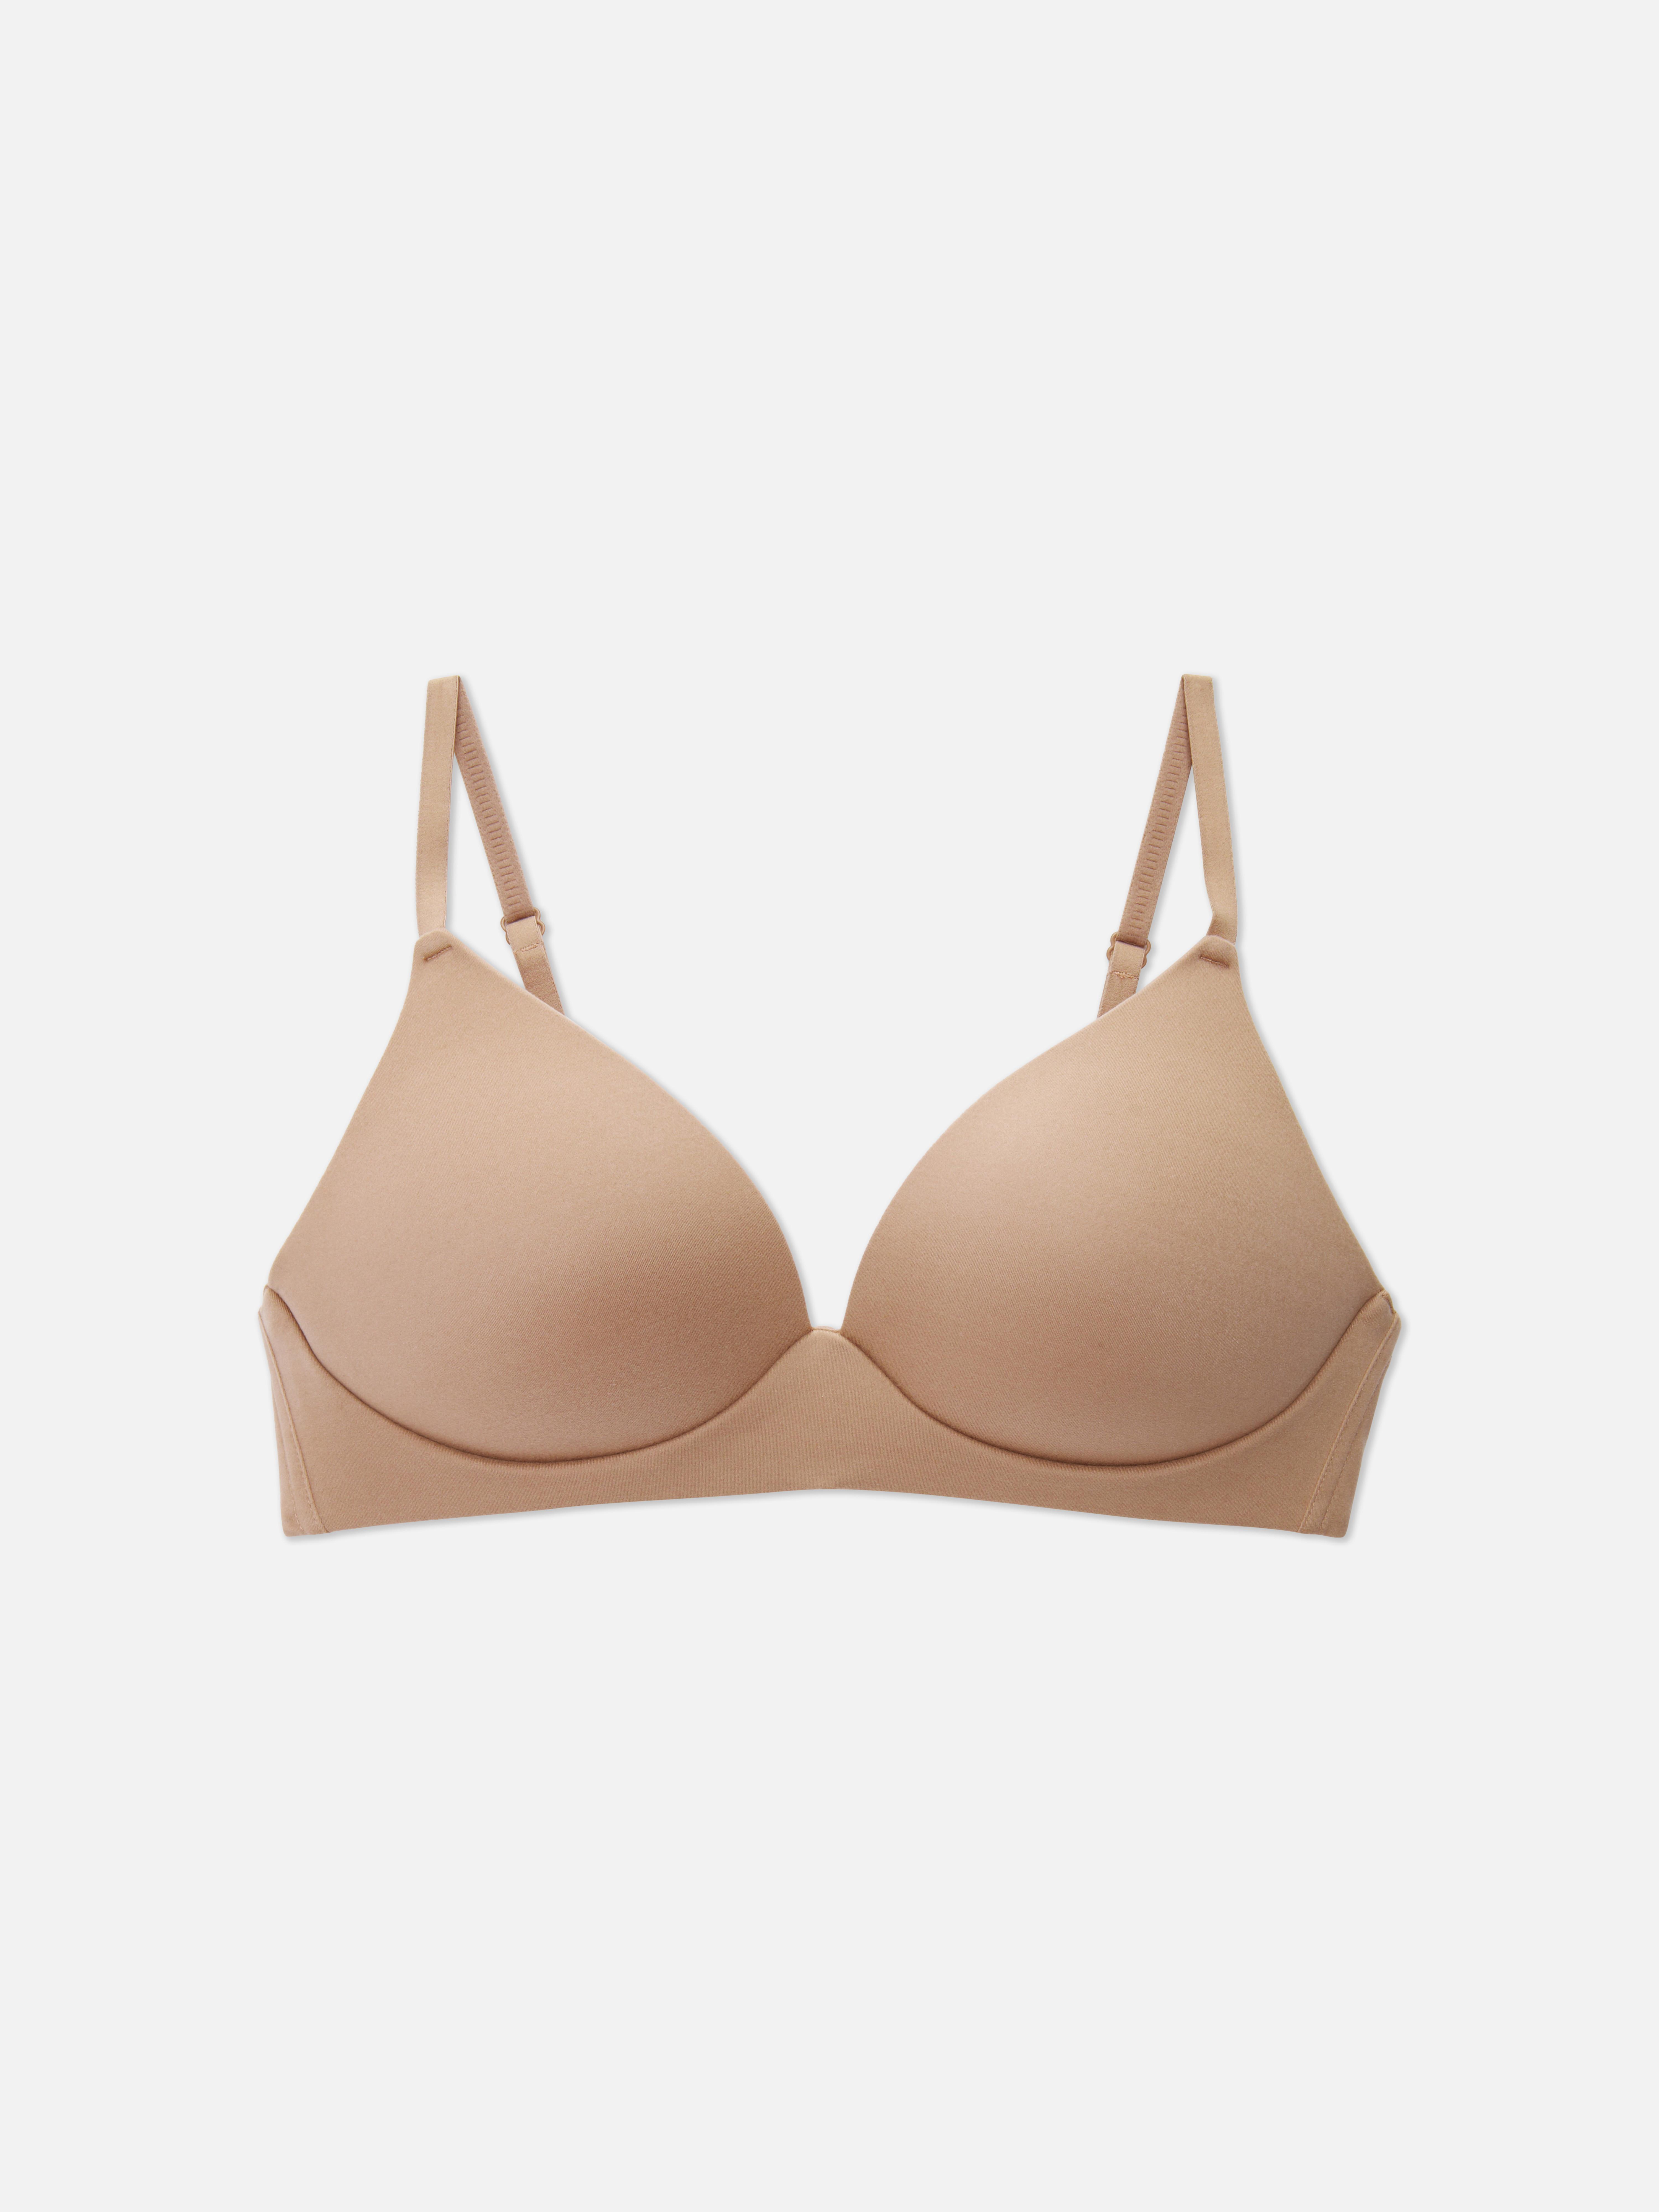 Primark Online Shop Women's T-Shirt Bra with Padded Push Up Bralette Bra  Without Underwire Seamless Comfortable Soft Bra